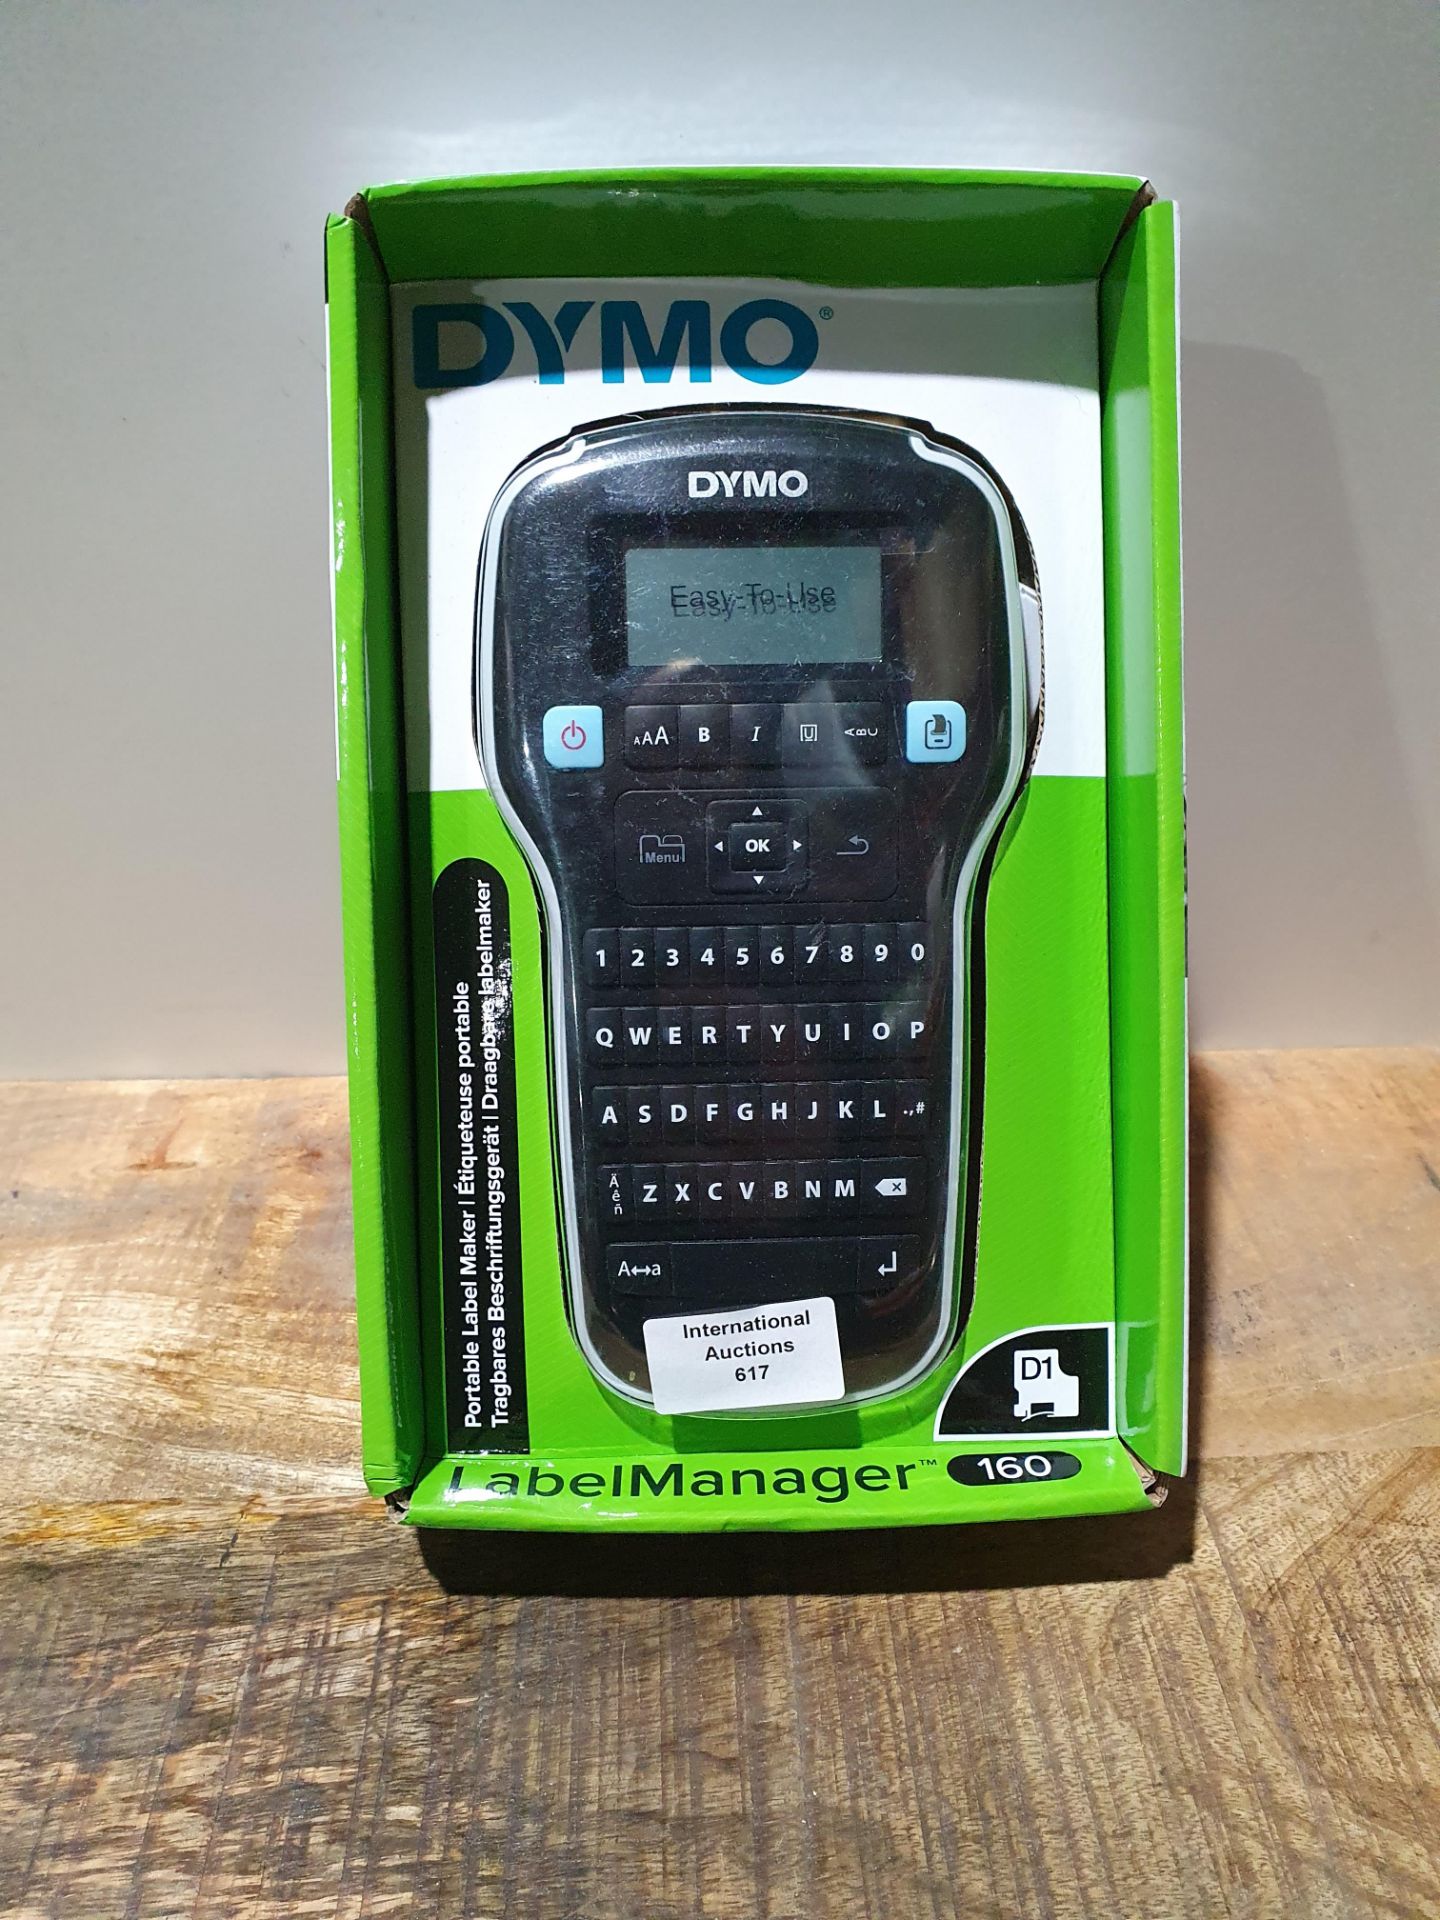 DYMO LABEL MANAGER 160 RRP £49.99Condition ReportAppraisal Available on Request - All Items are